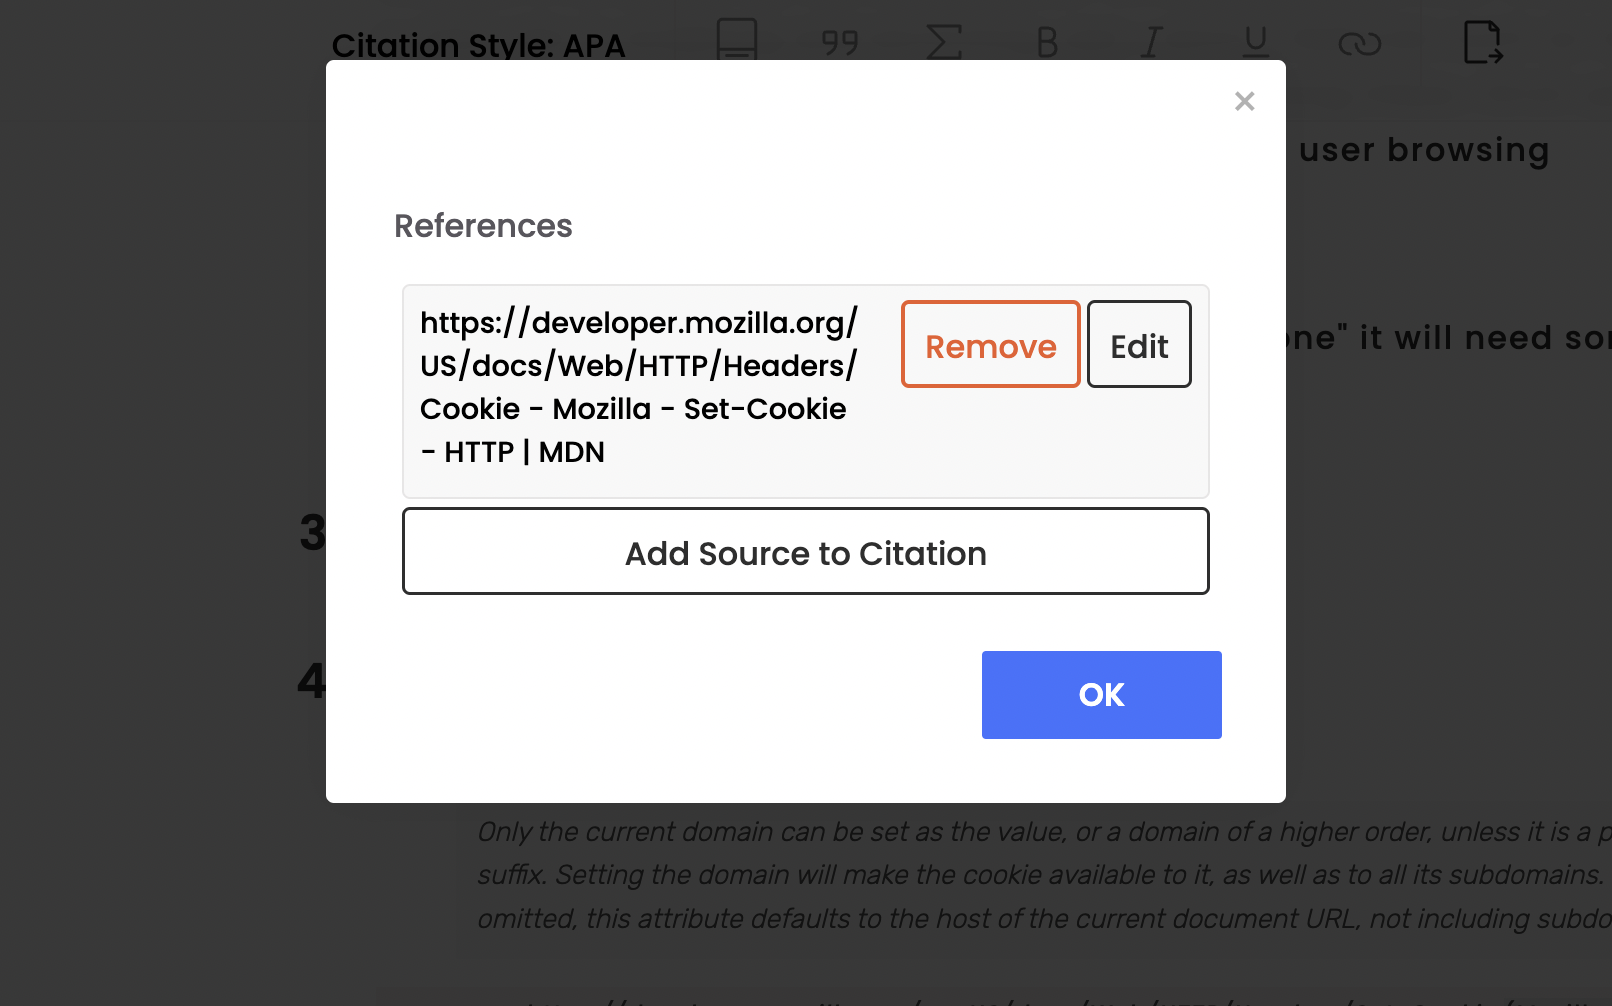 A screenshot showing where the specify the page number when citing an already cited reference